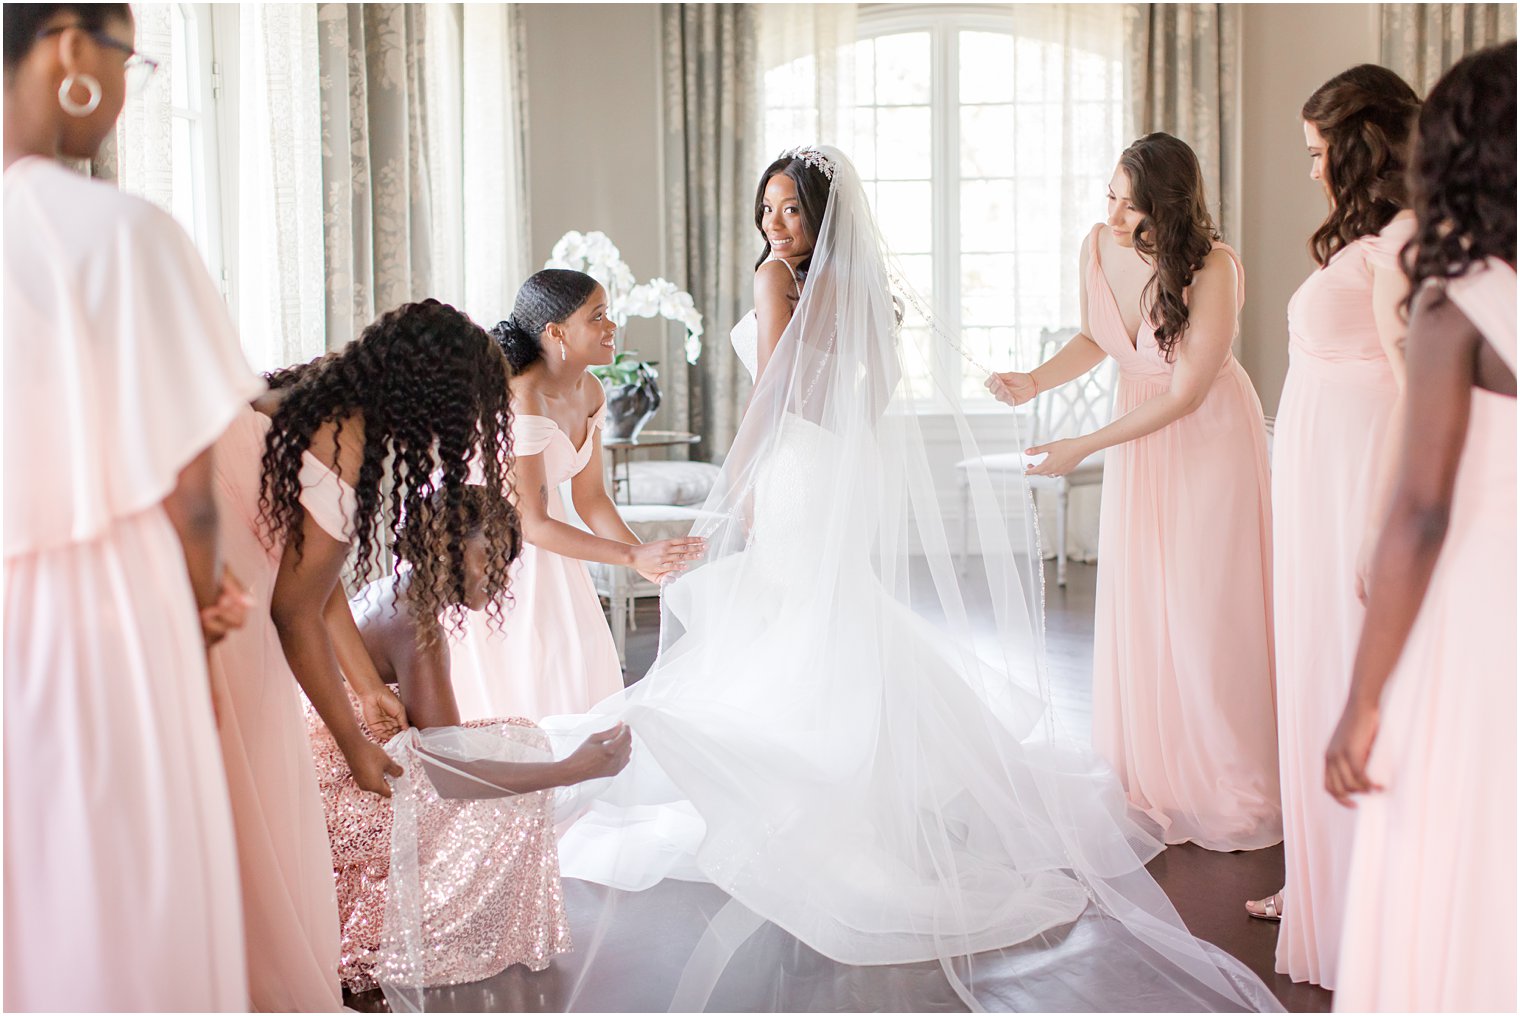 Bride and Bridesmaids getting ready on wedding morning